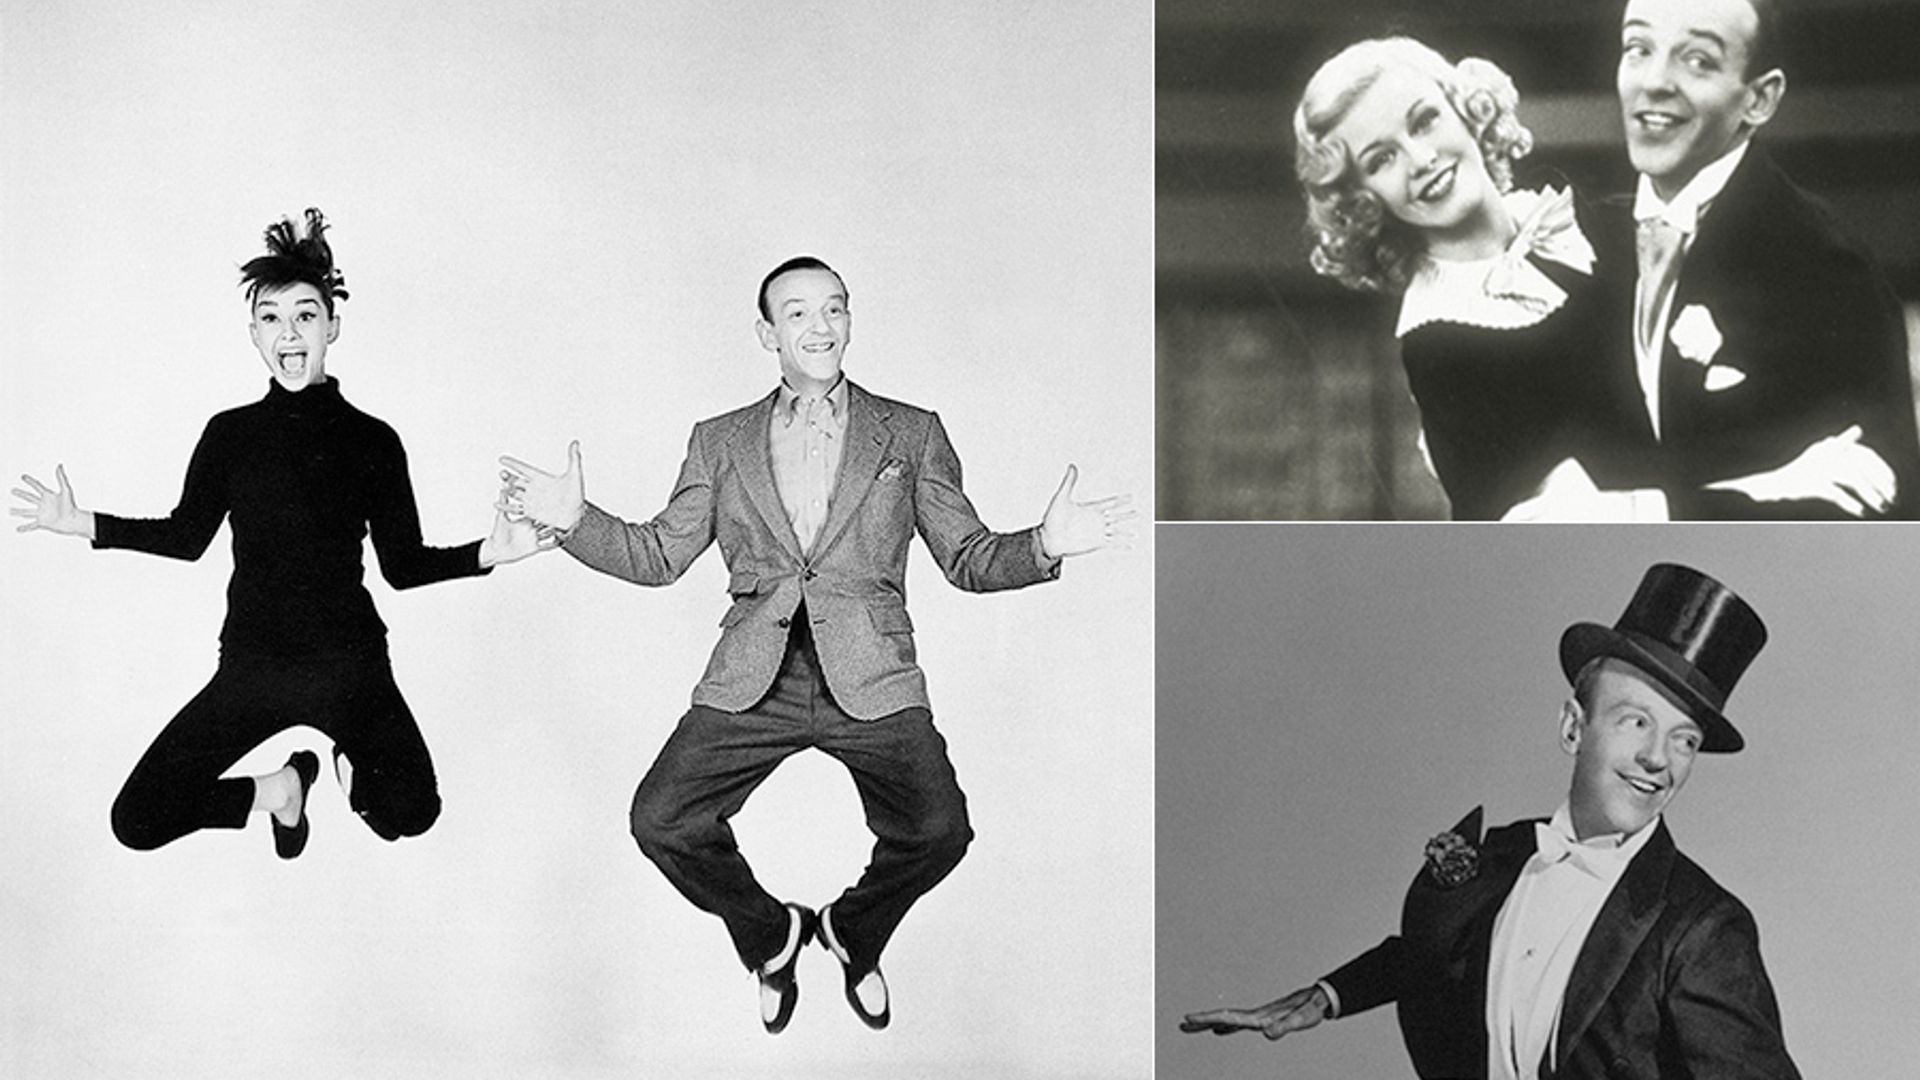 Remembering Fred Astaire: 10 facts about the Hollywood icon